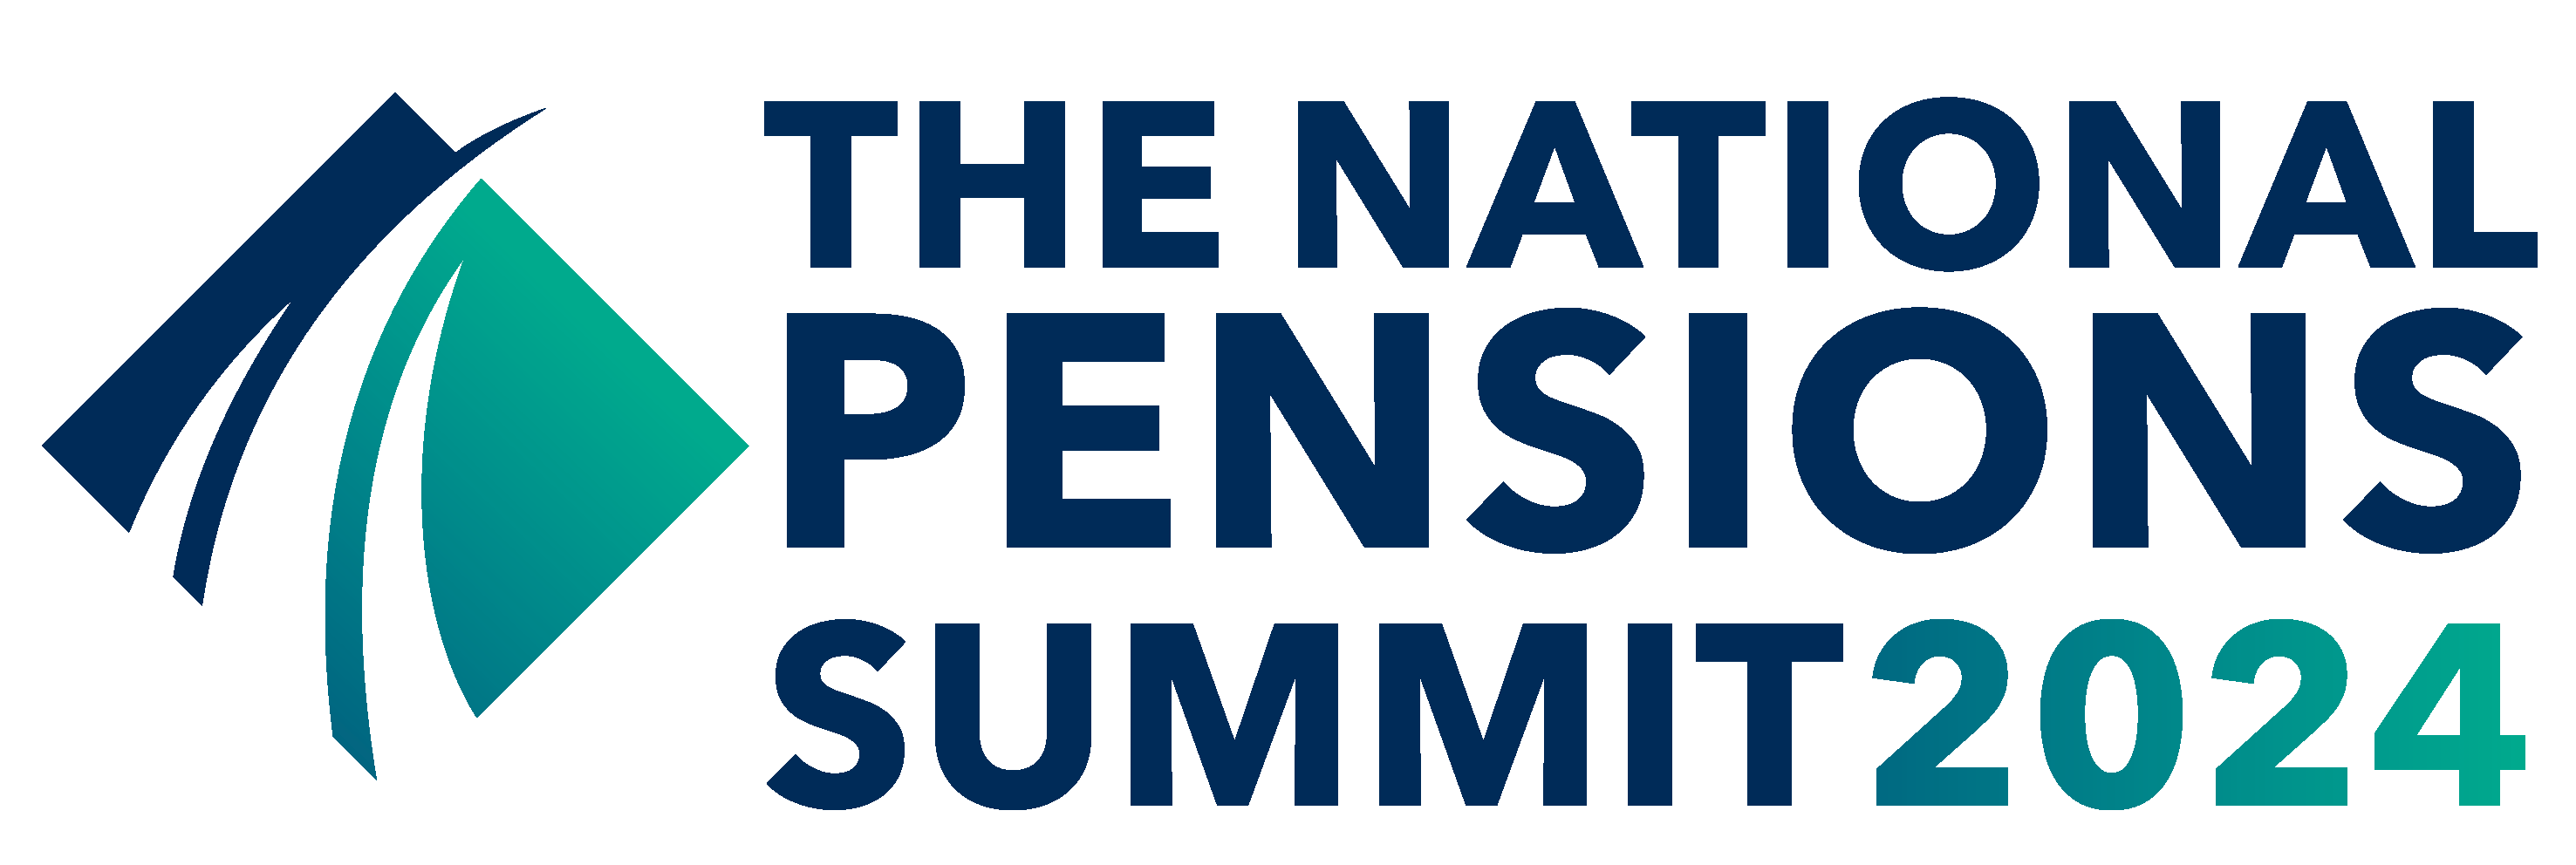 The National Pensions Summit 2024